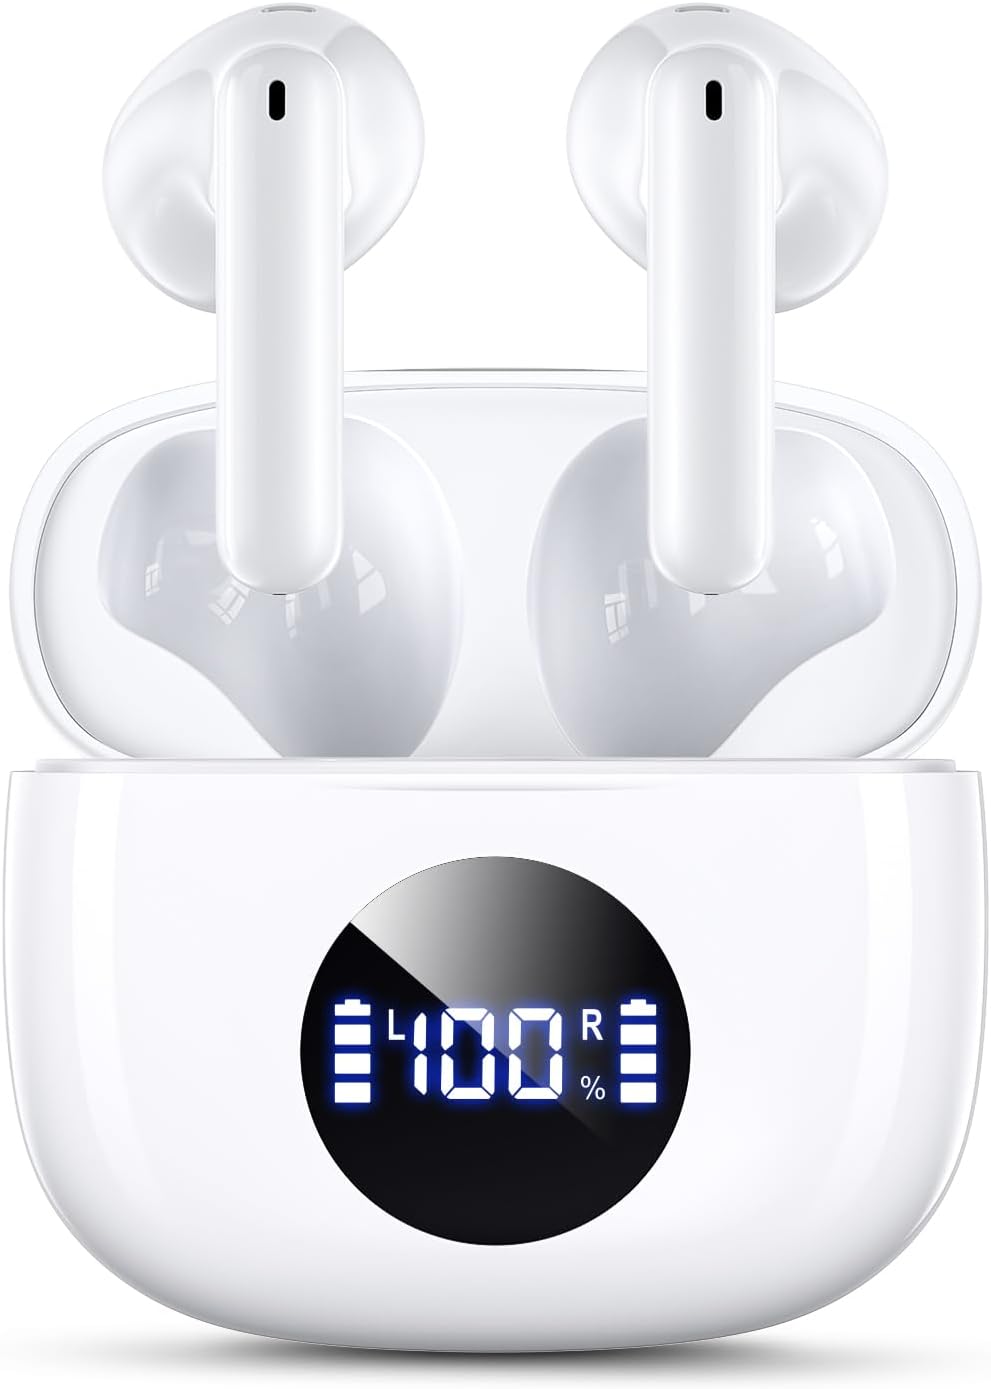 Act Fast! ZONWOO Wireless Earbuds - % Off! Limited Stock!